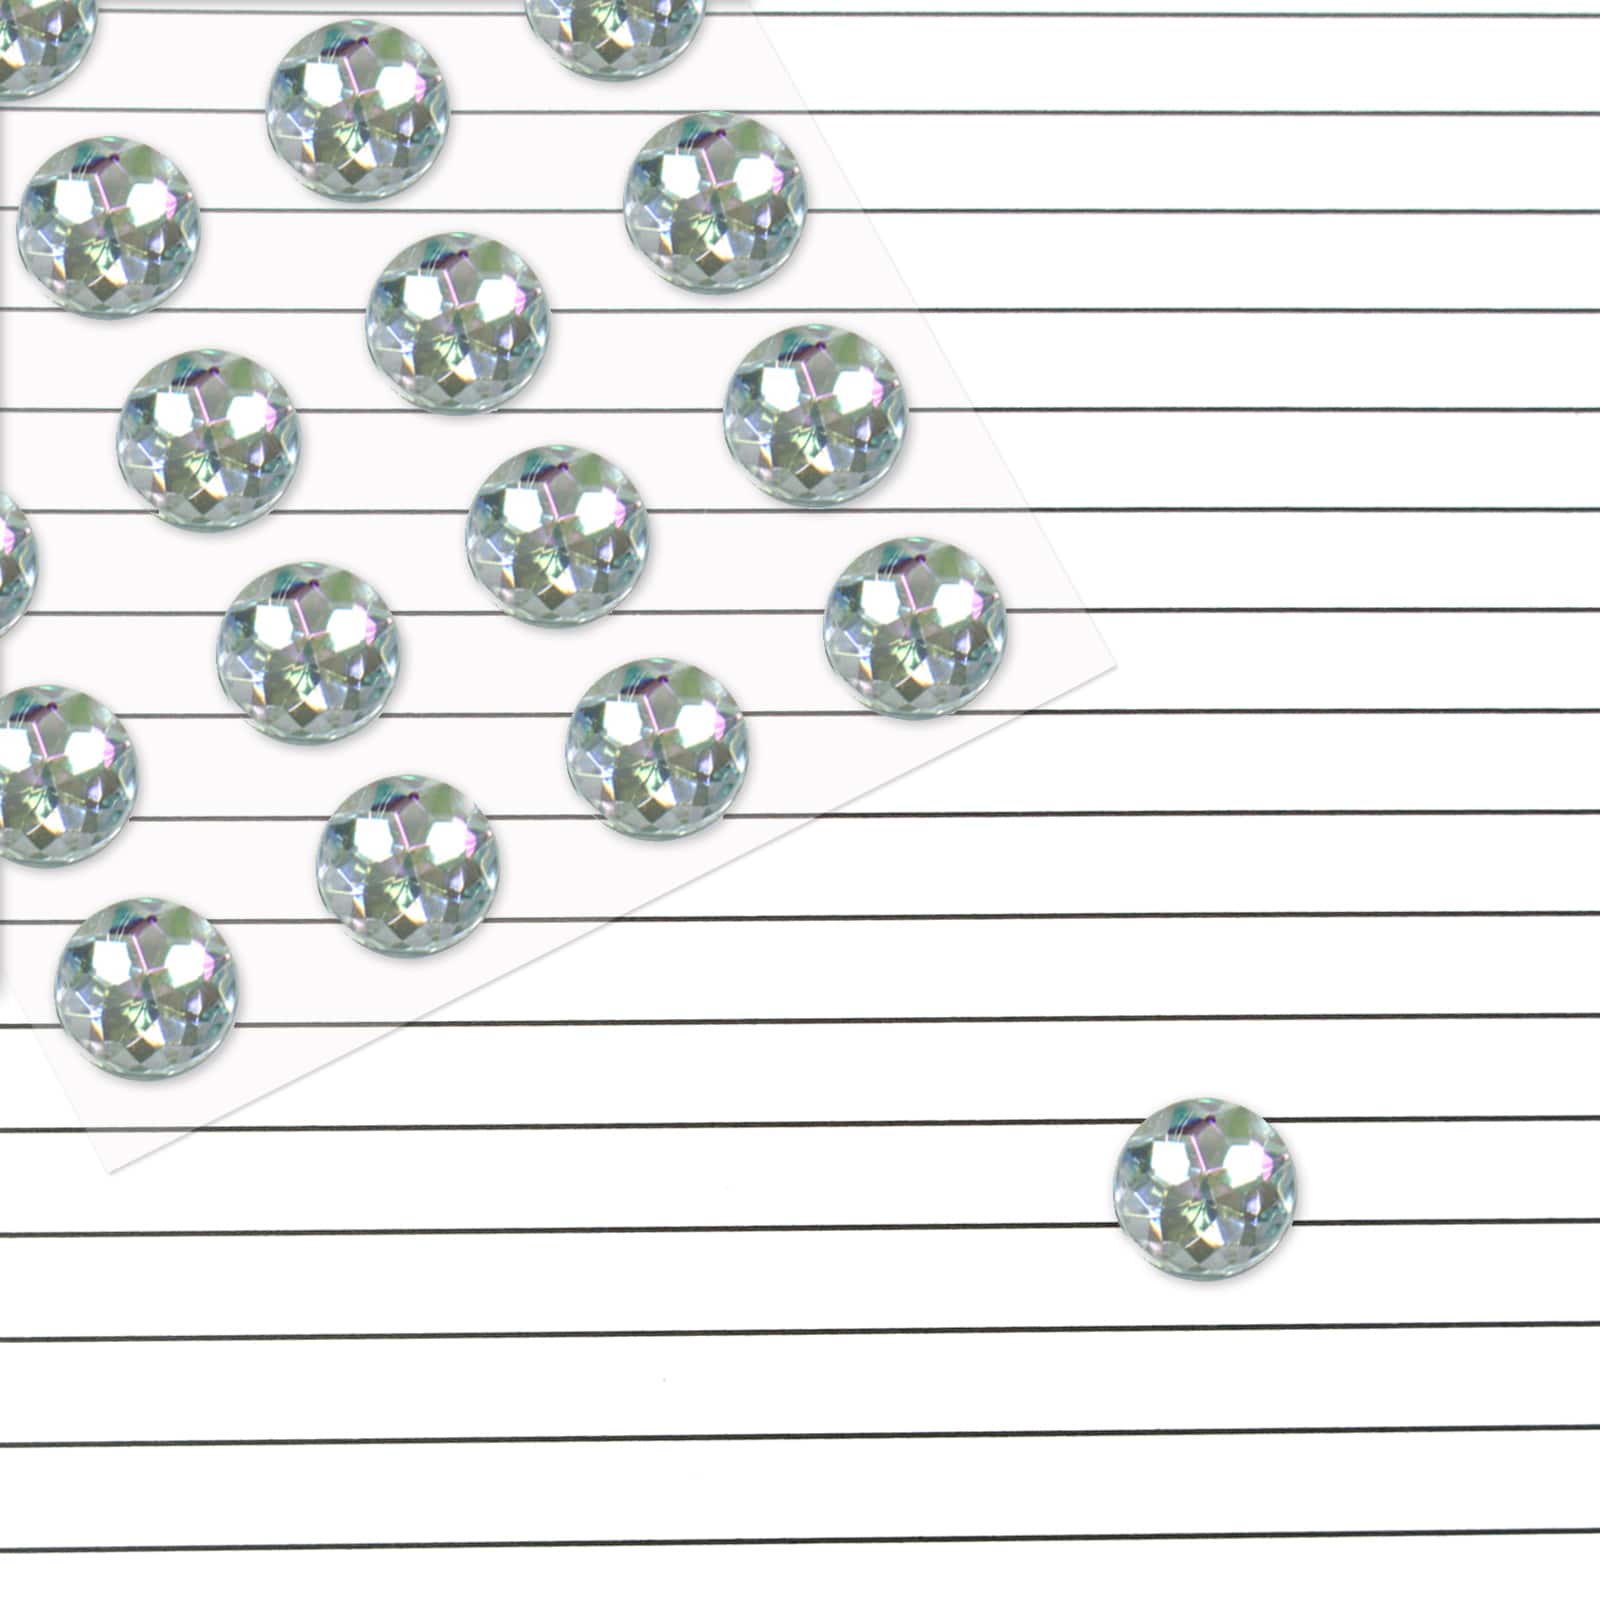 Adhesive Backed Iridescent Rhinestones by Recollections™